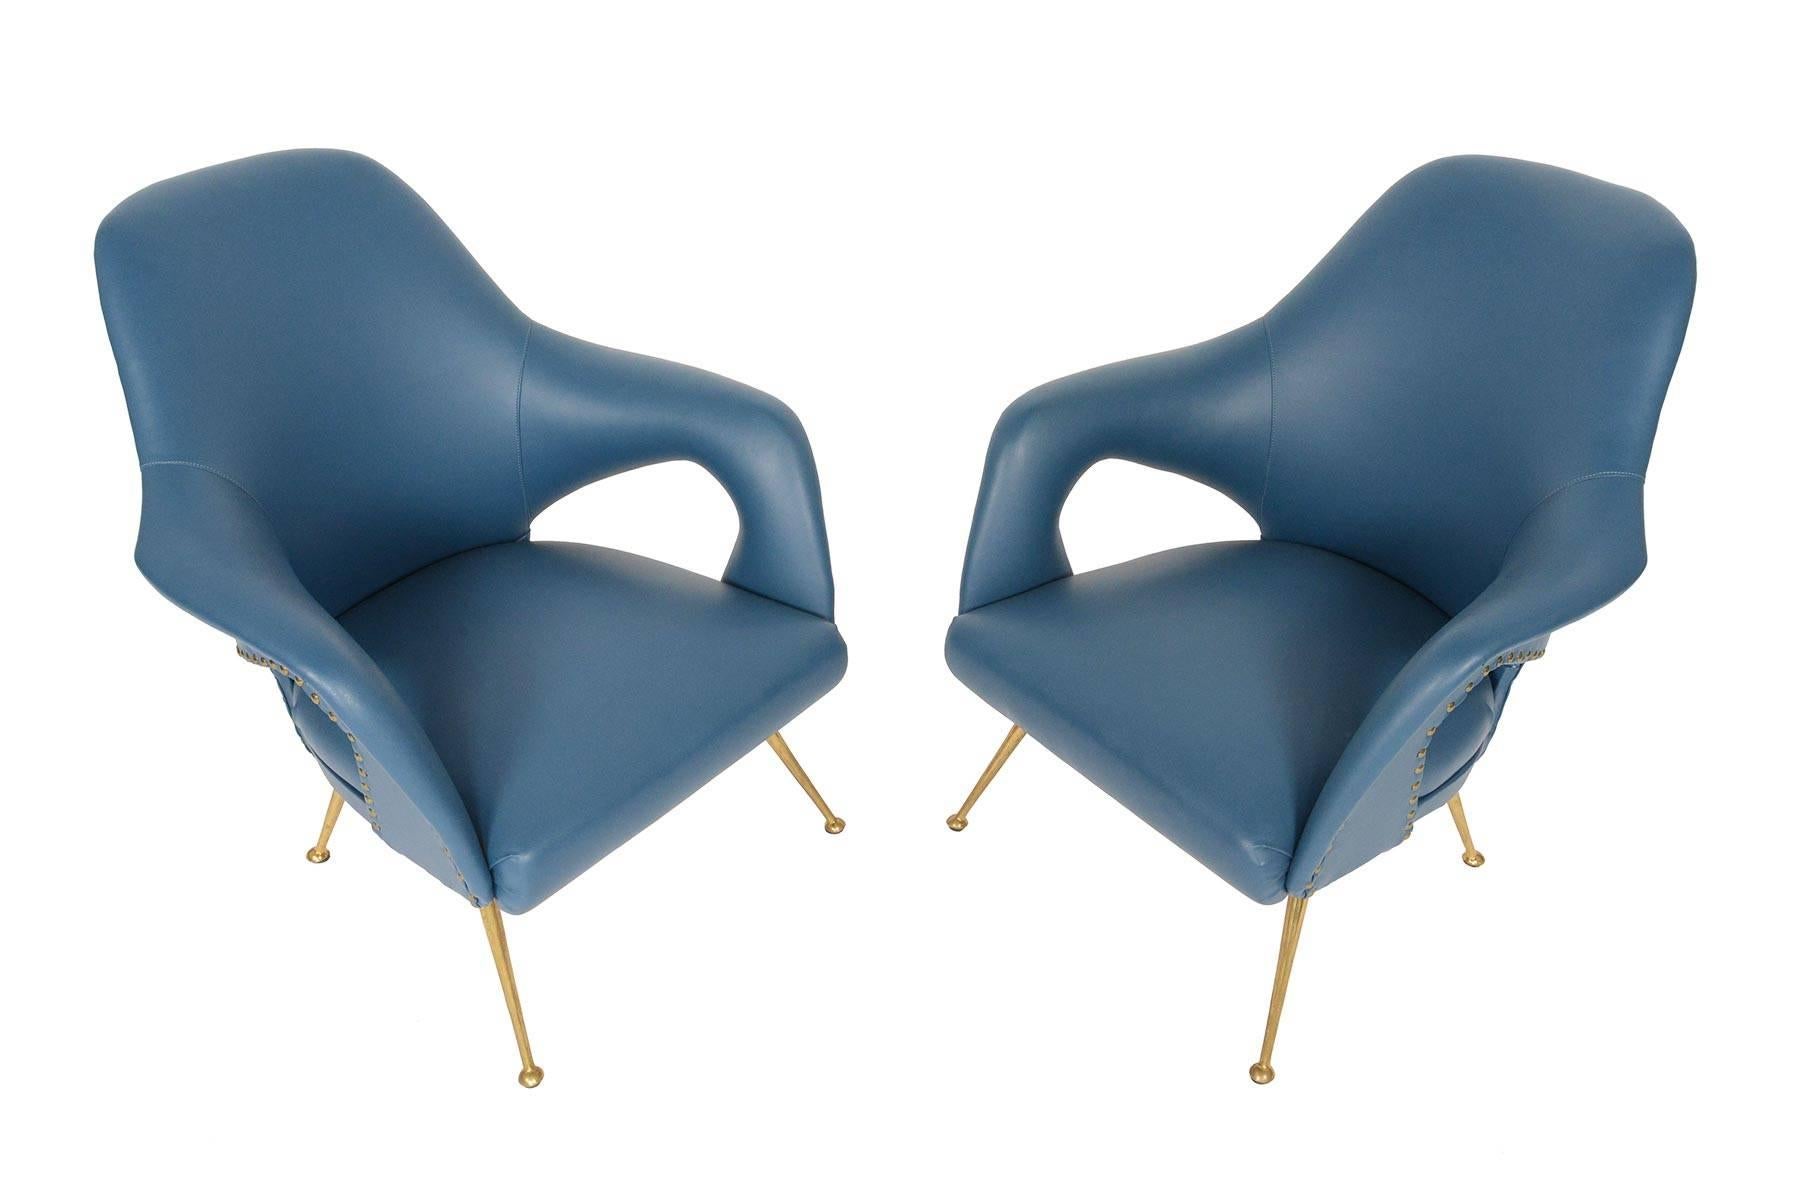 This pair of Italian modern lounge chairs was designed with organic forms in mind. Arms extend from the backrest to the seat for a continuous form. Cut-outs beneath the arms provide a light, airy effect and a stunning Silhouette from any direction.